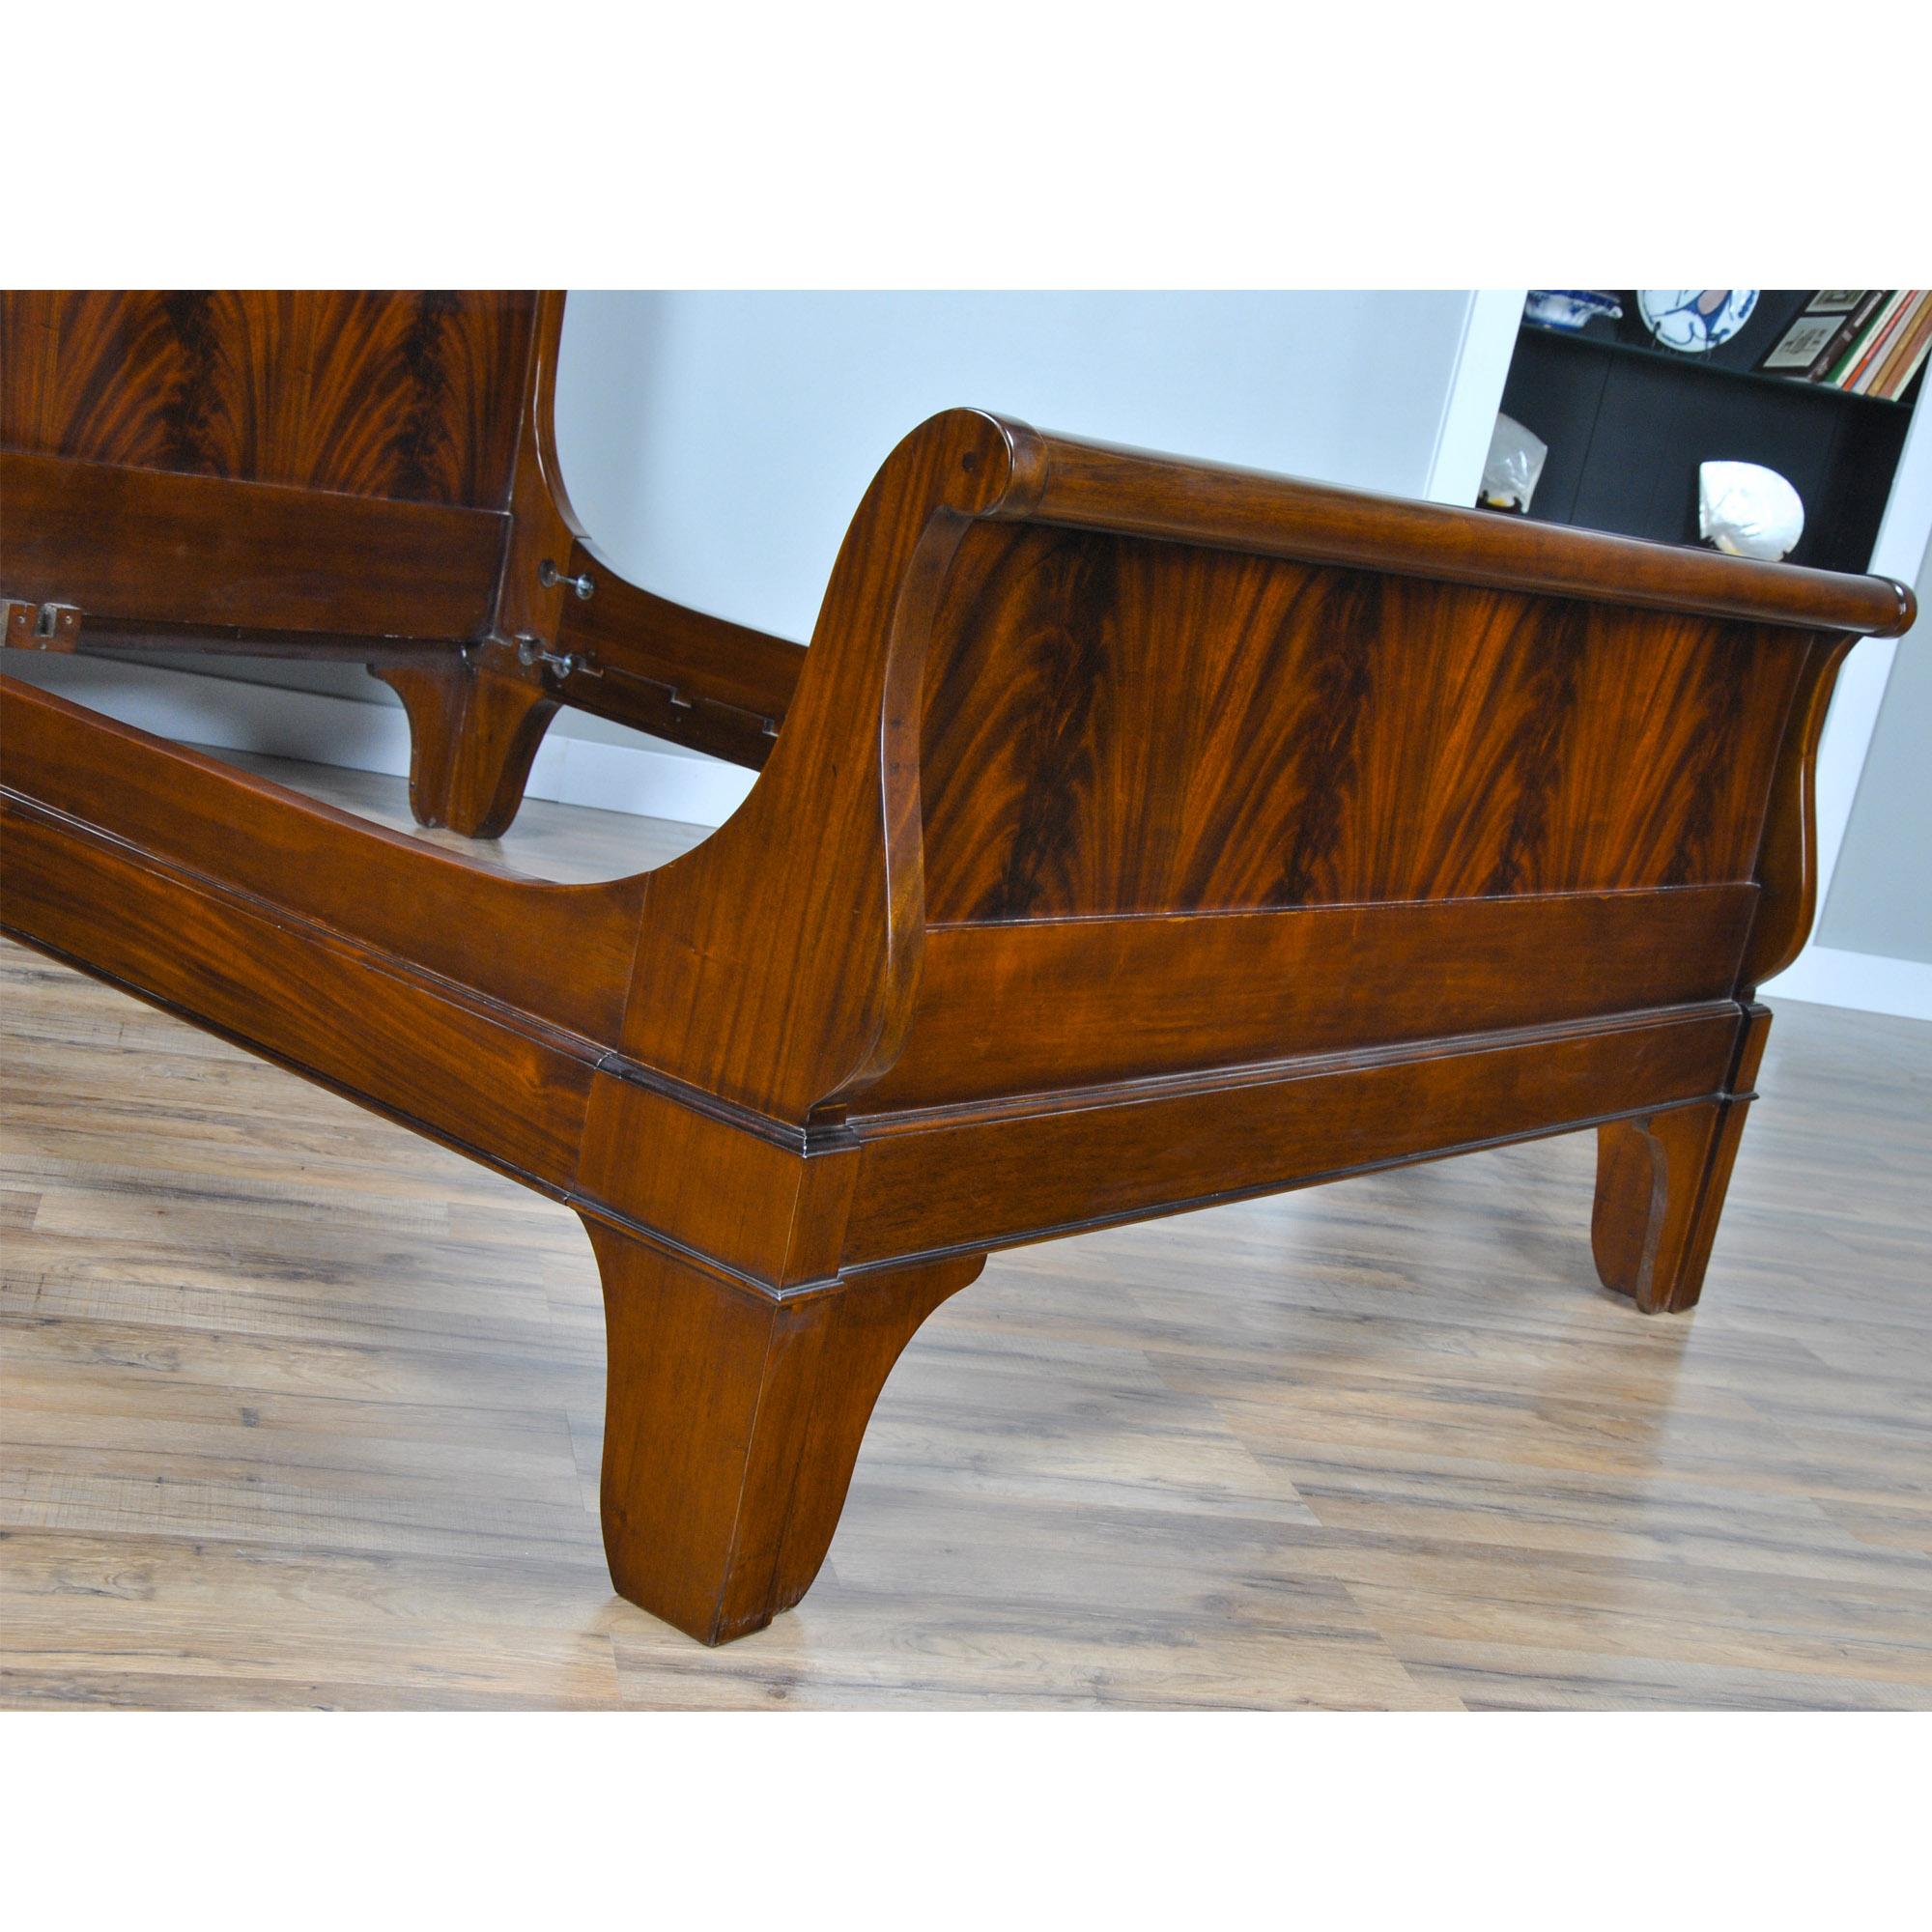 Mahogany King Size Sleigh Bed In New Condition For Sale In Annville, PA